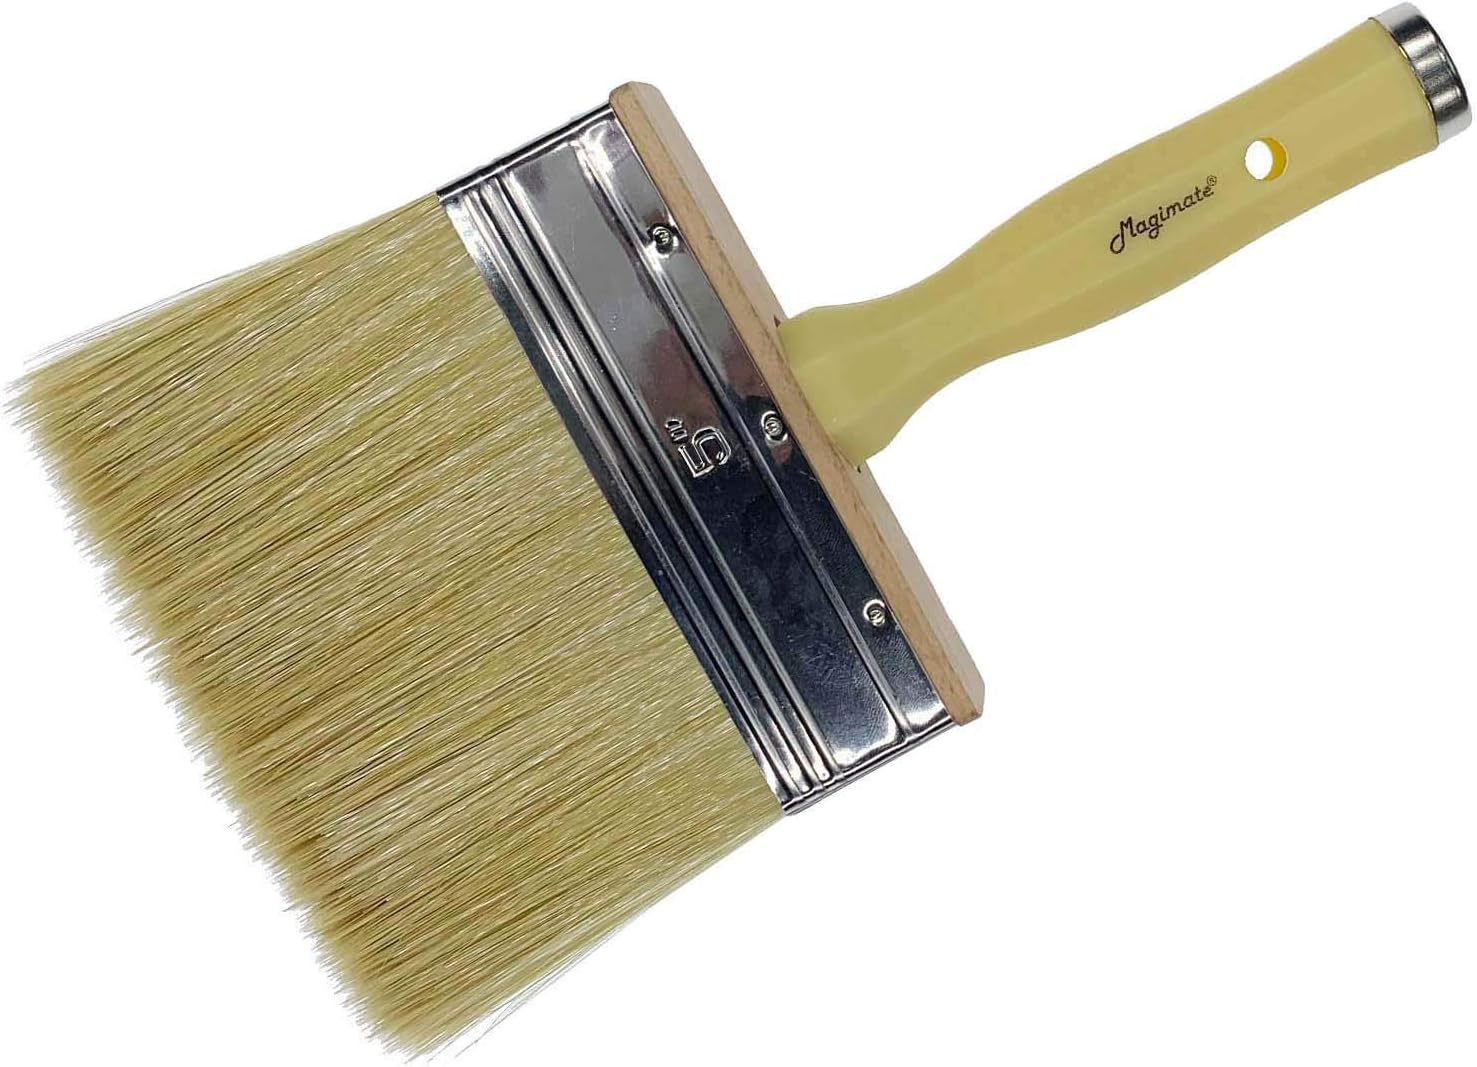 Magimate Deck Brush for Applying Stain, 5-inch Paint [...]